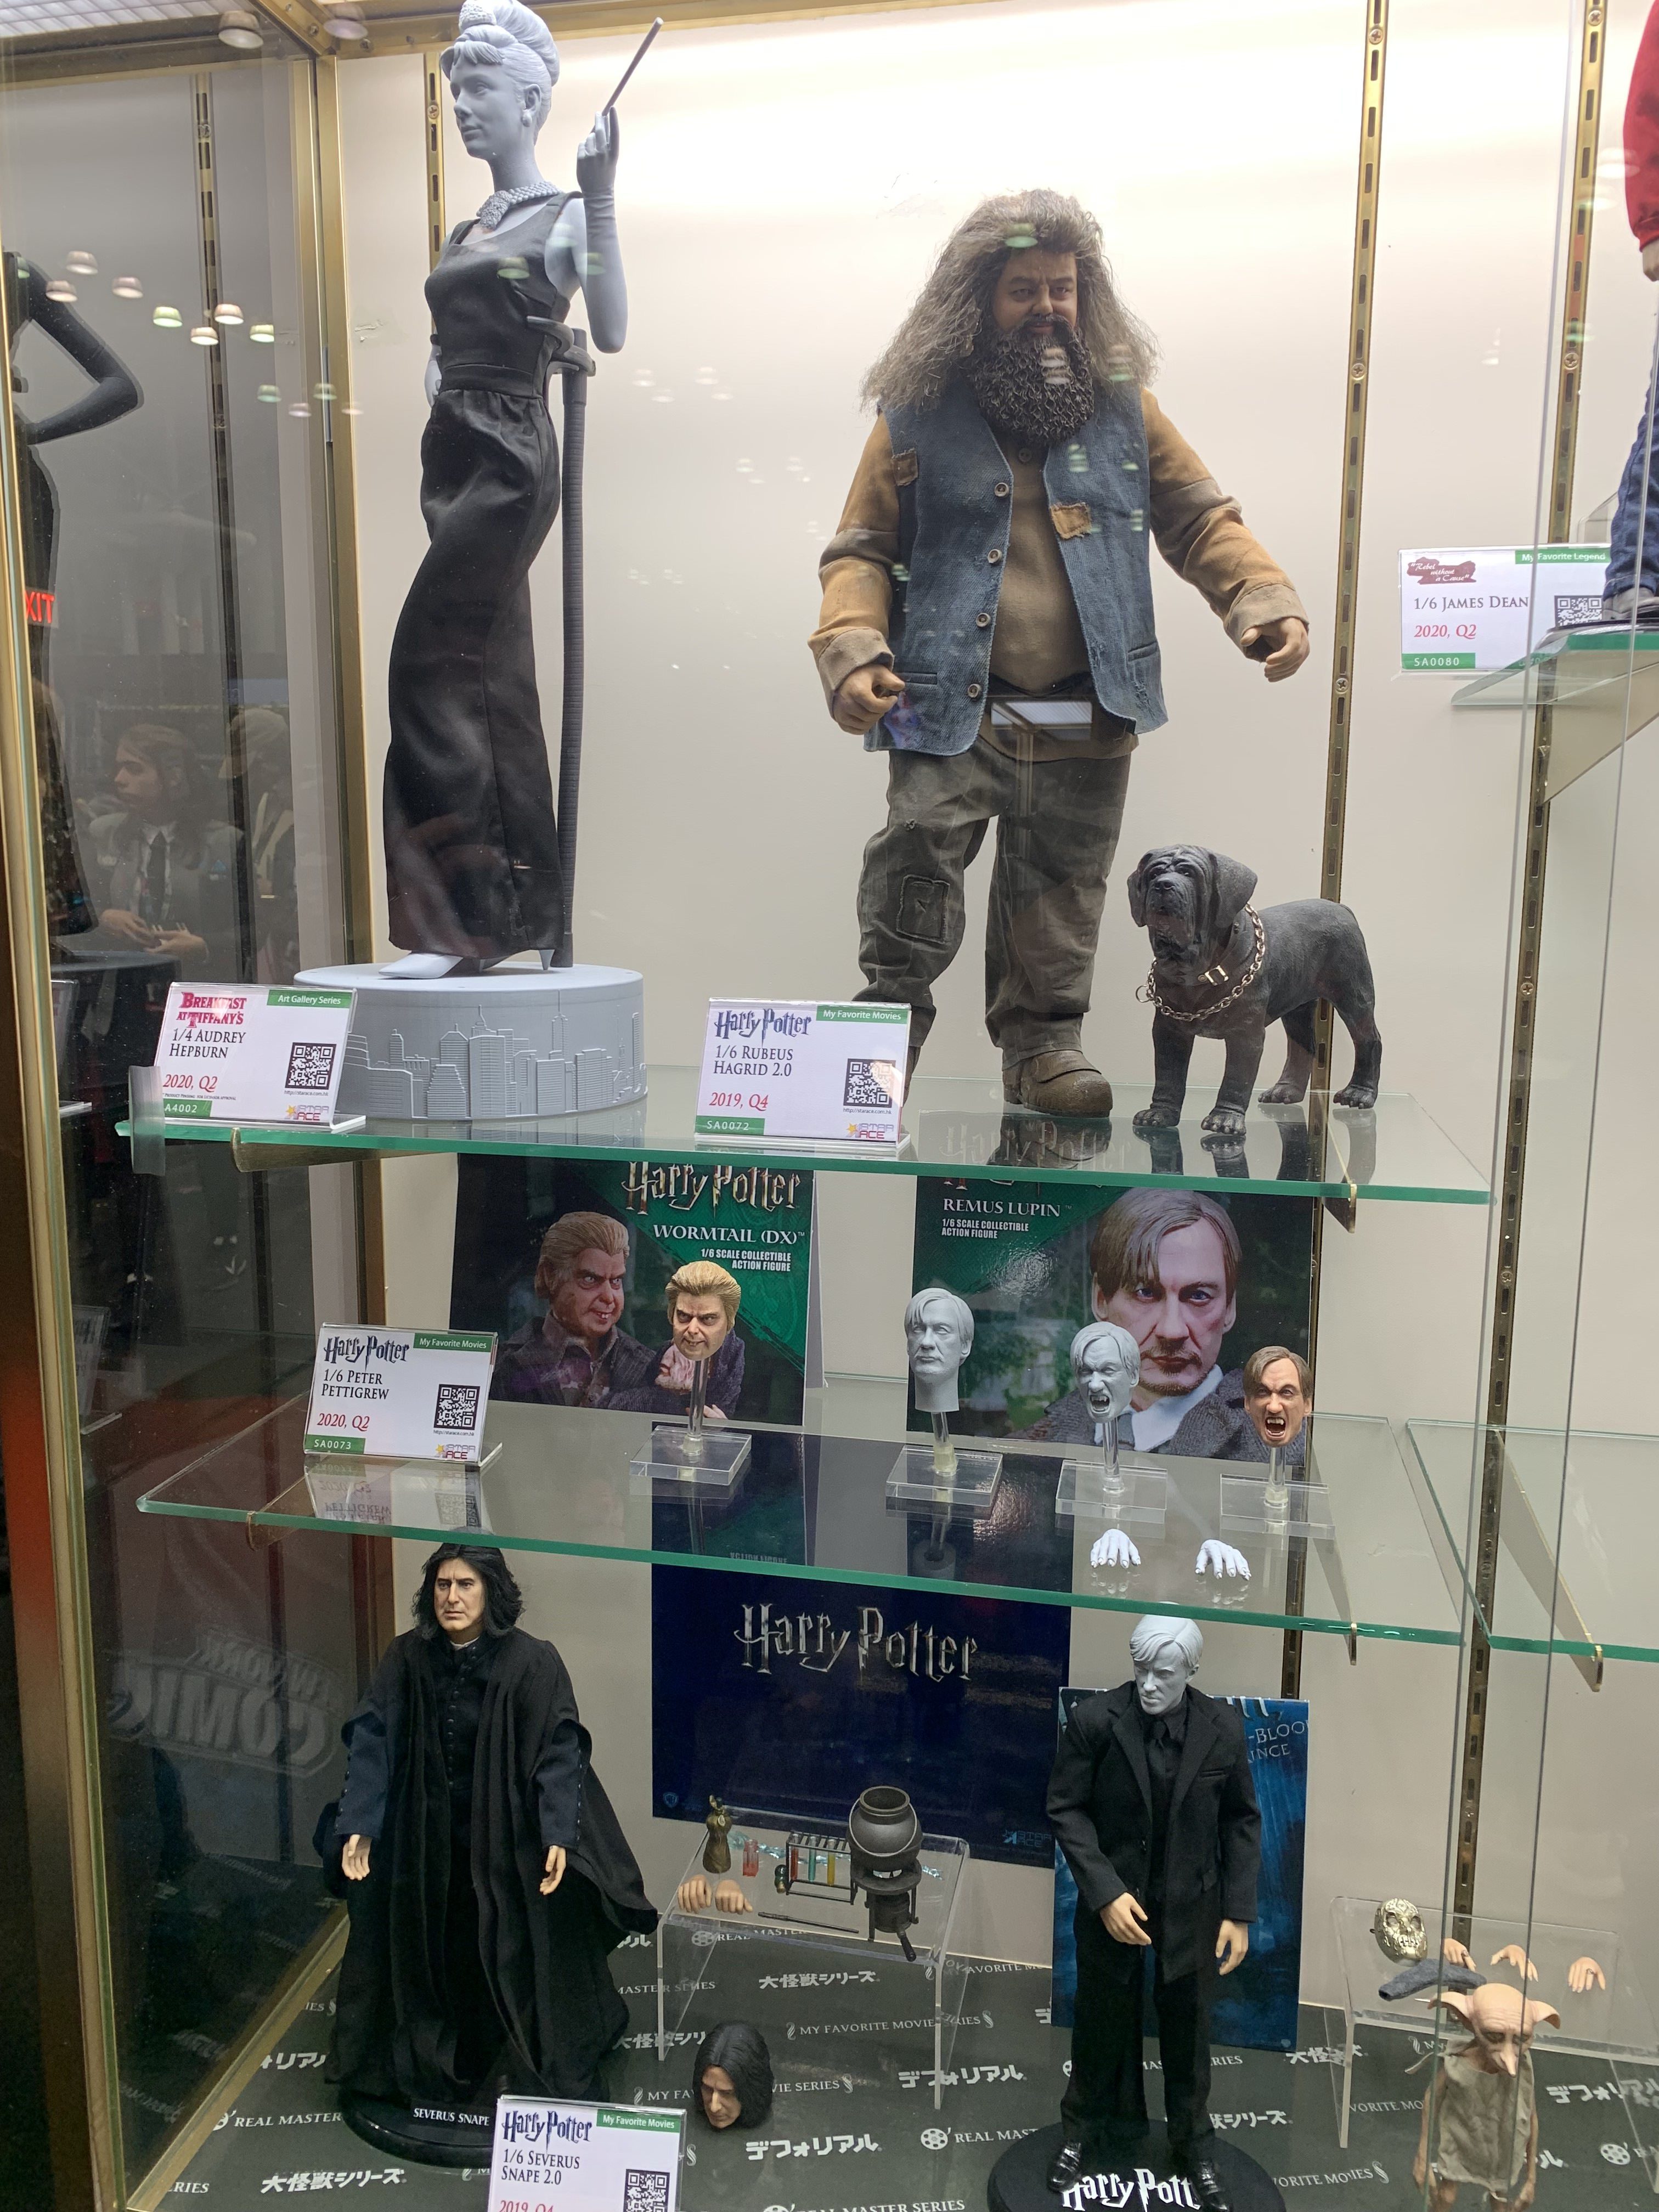 Check out some of Star Ace Toys Limited’s “Harry Potter” figures!